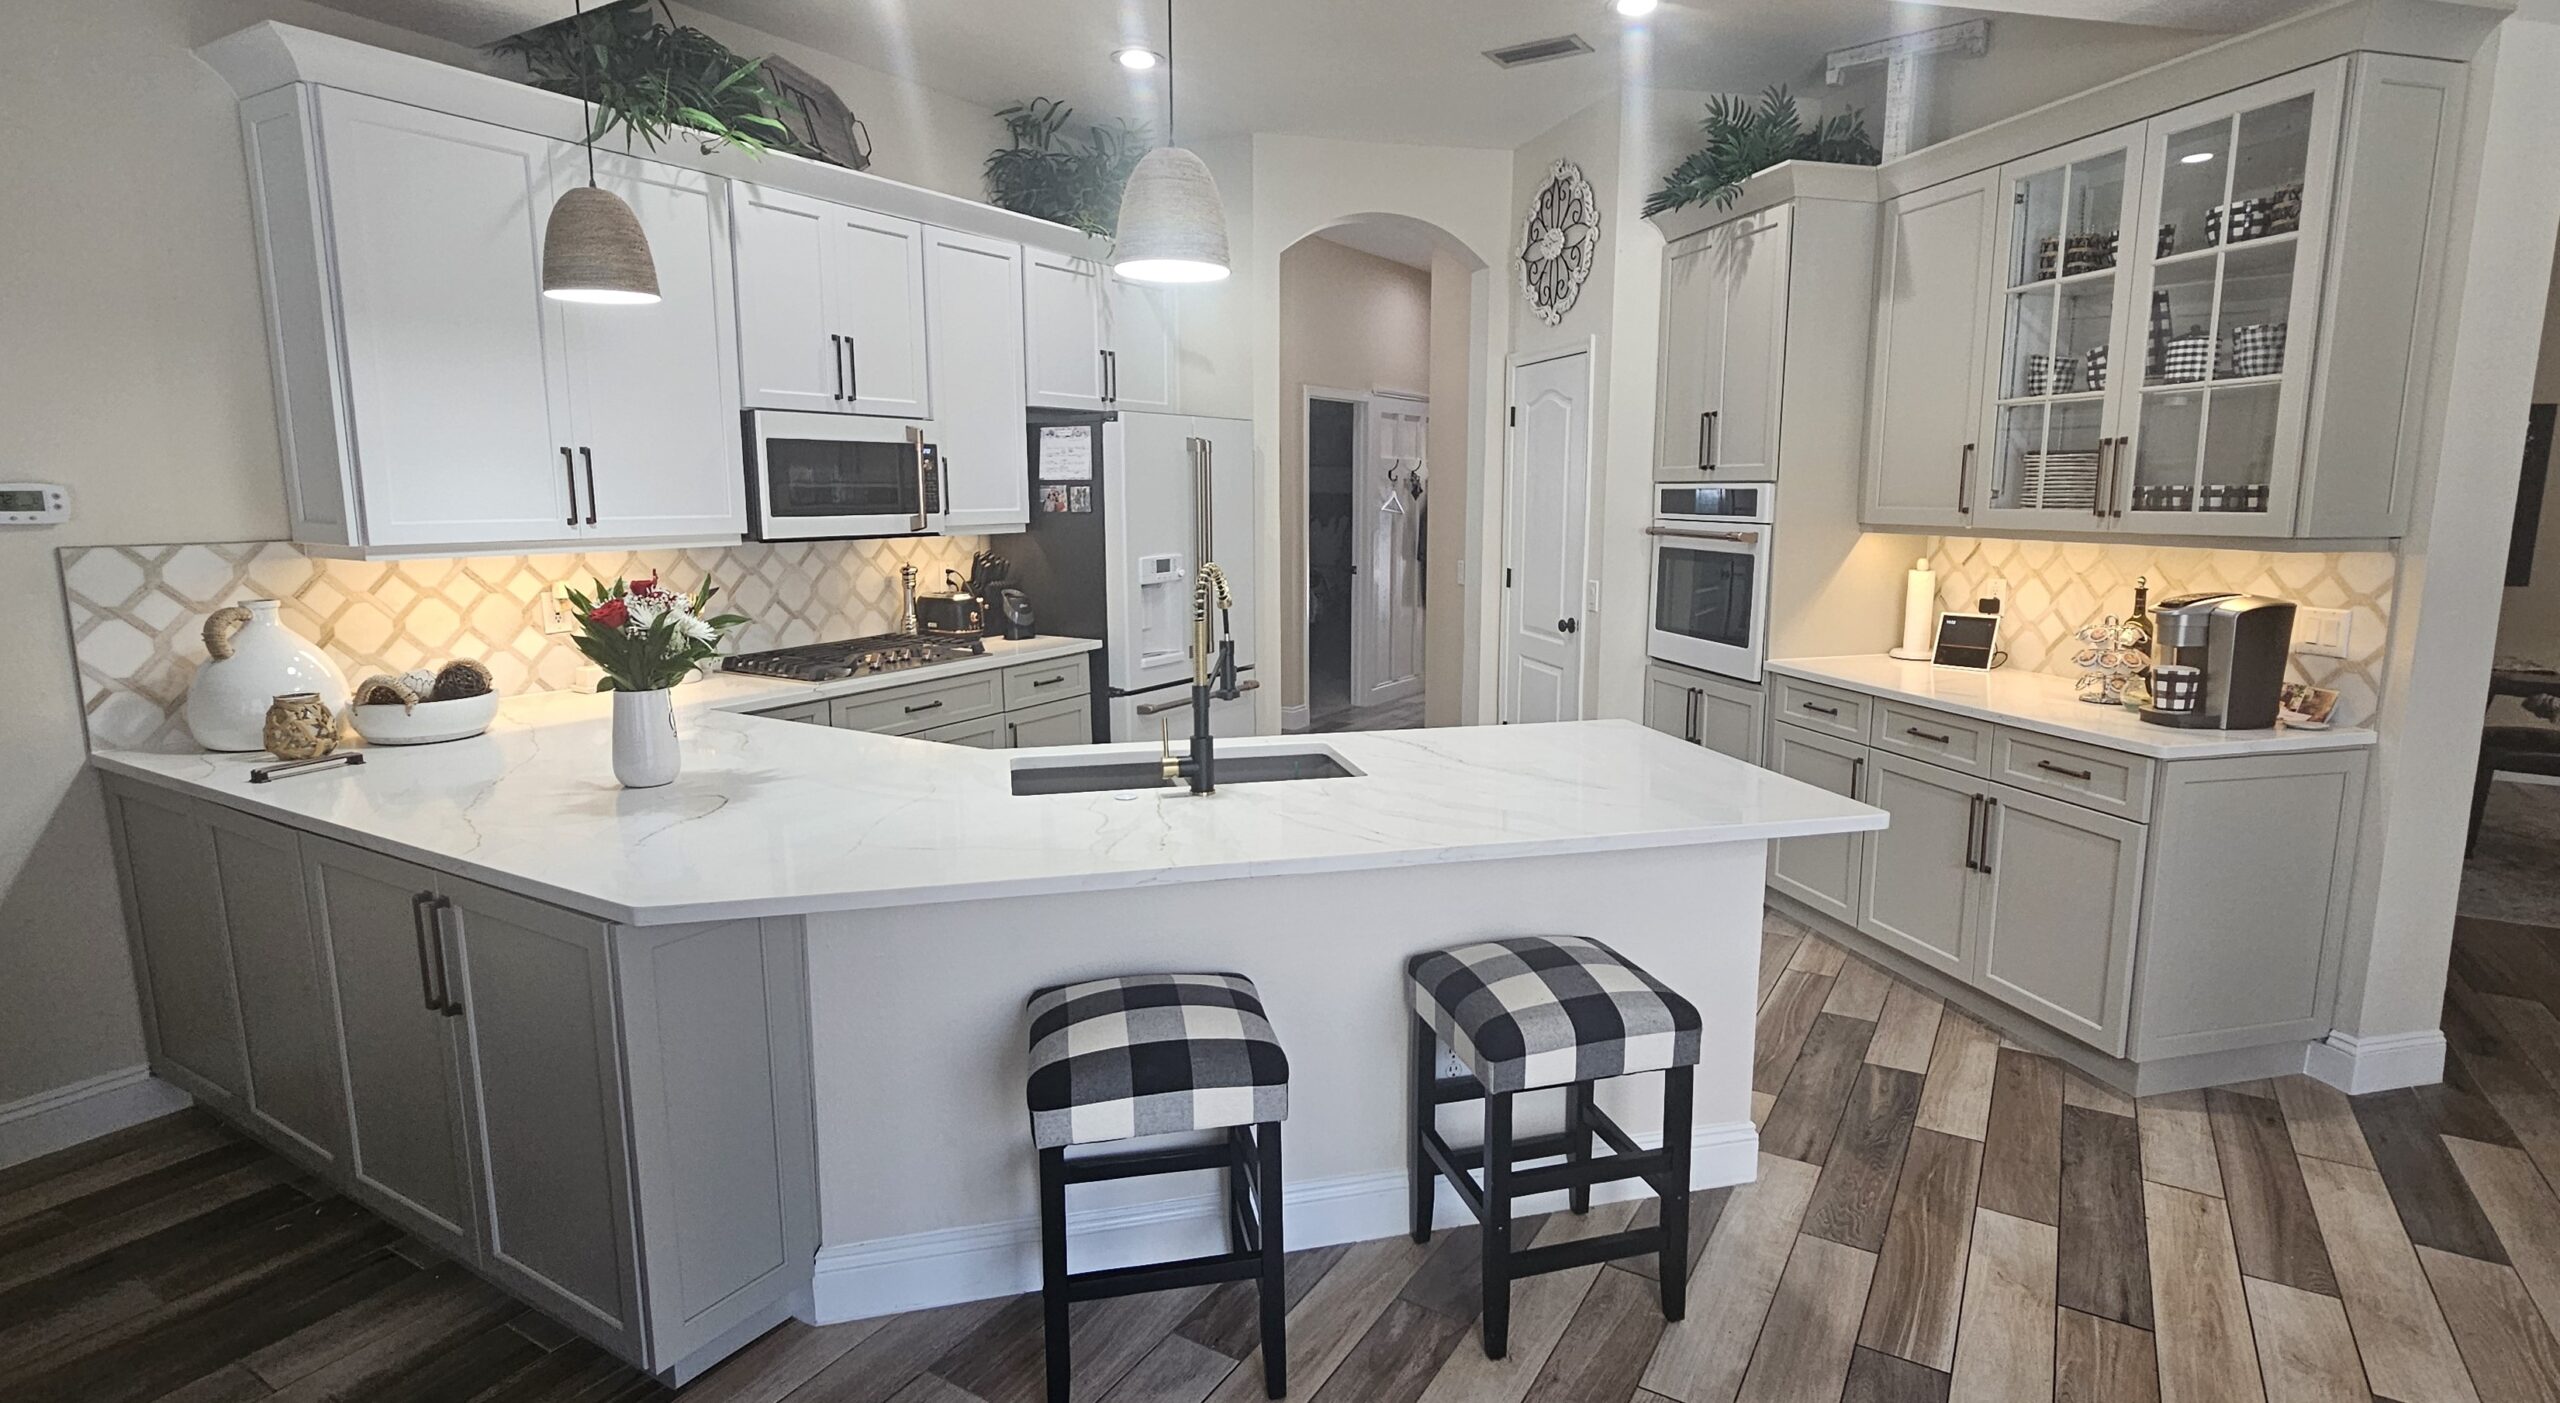 Modern appliances with a high-quality finish, granite worktops, and sleek white cabinet doors in Seven Springs 